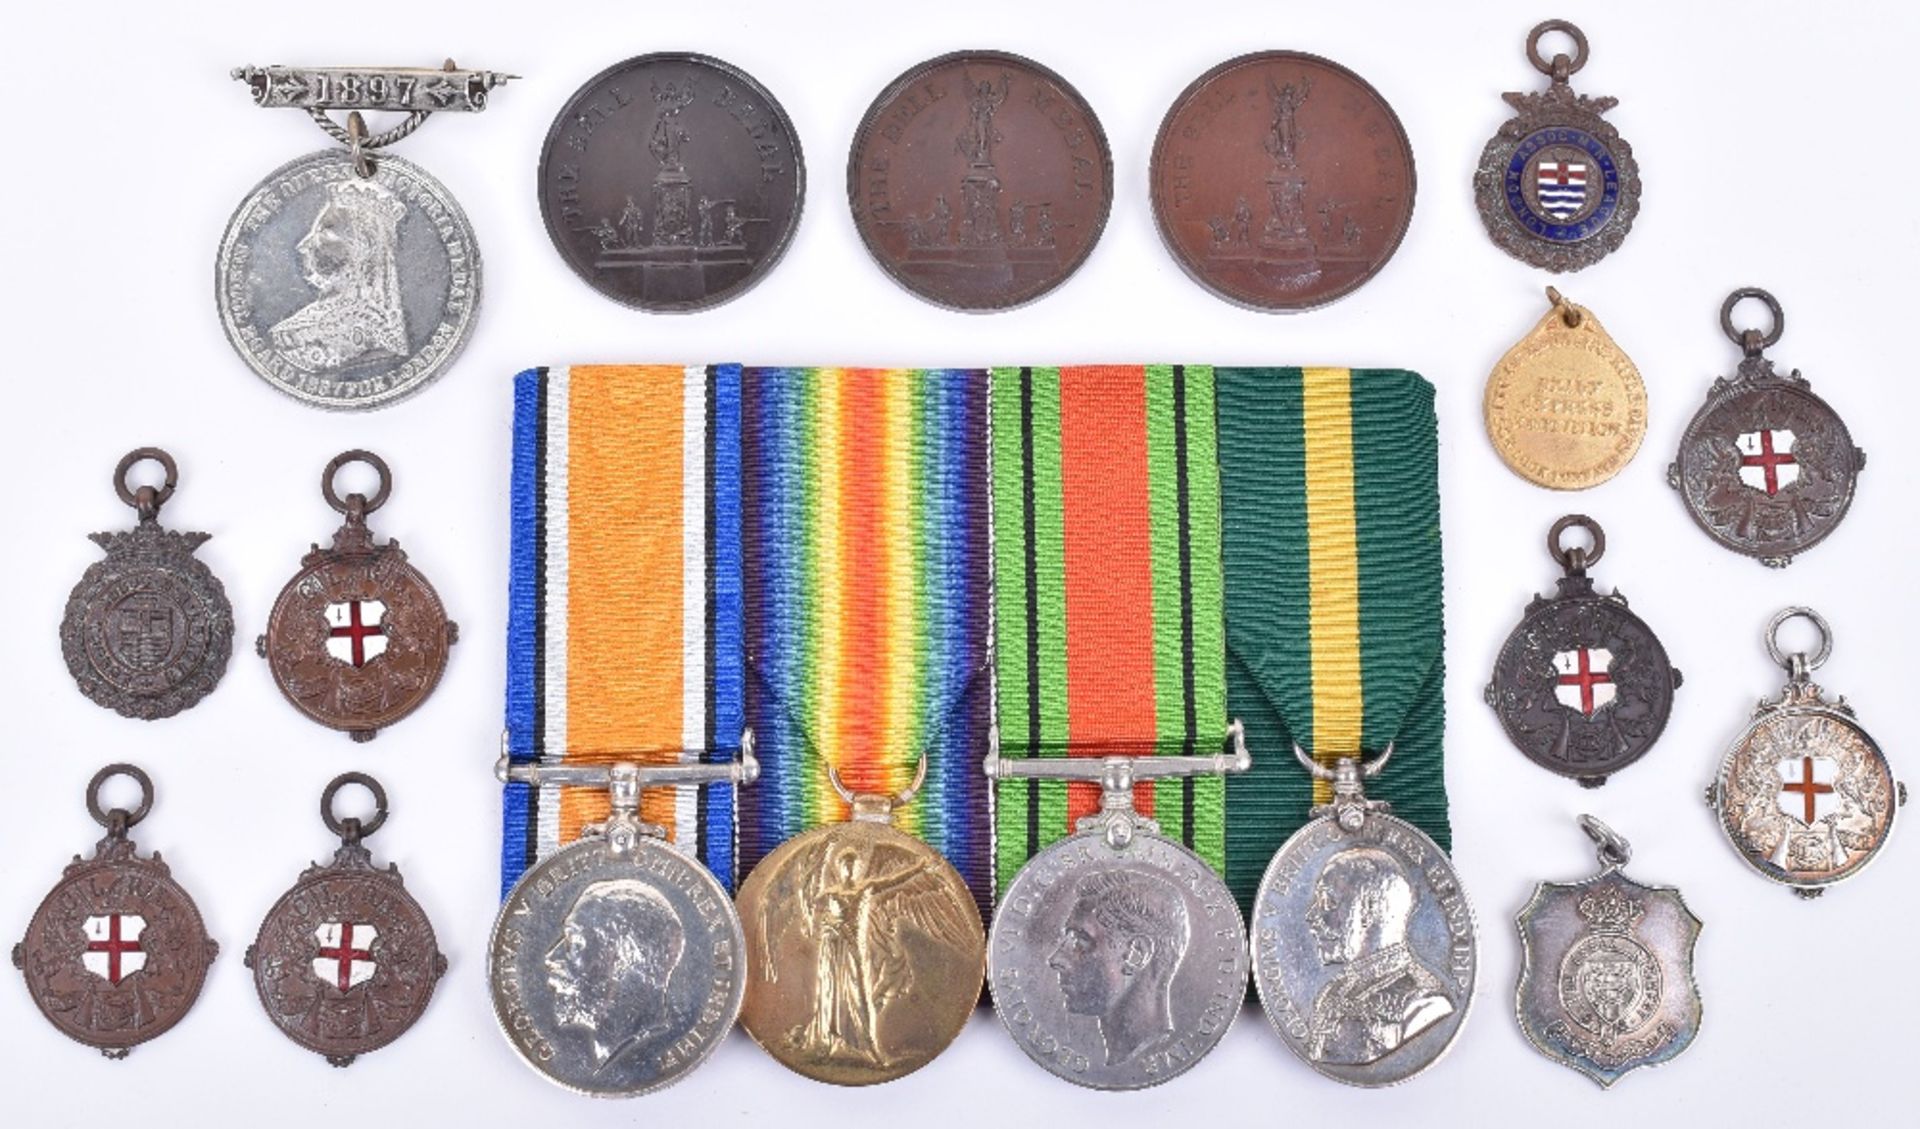 Scarce WW1 and Territorial Medal Group of Four Royal Navy and 10th London Regiment